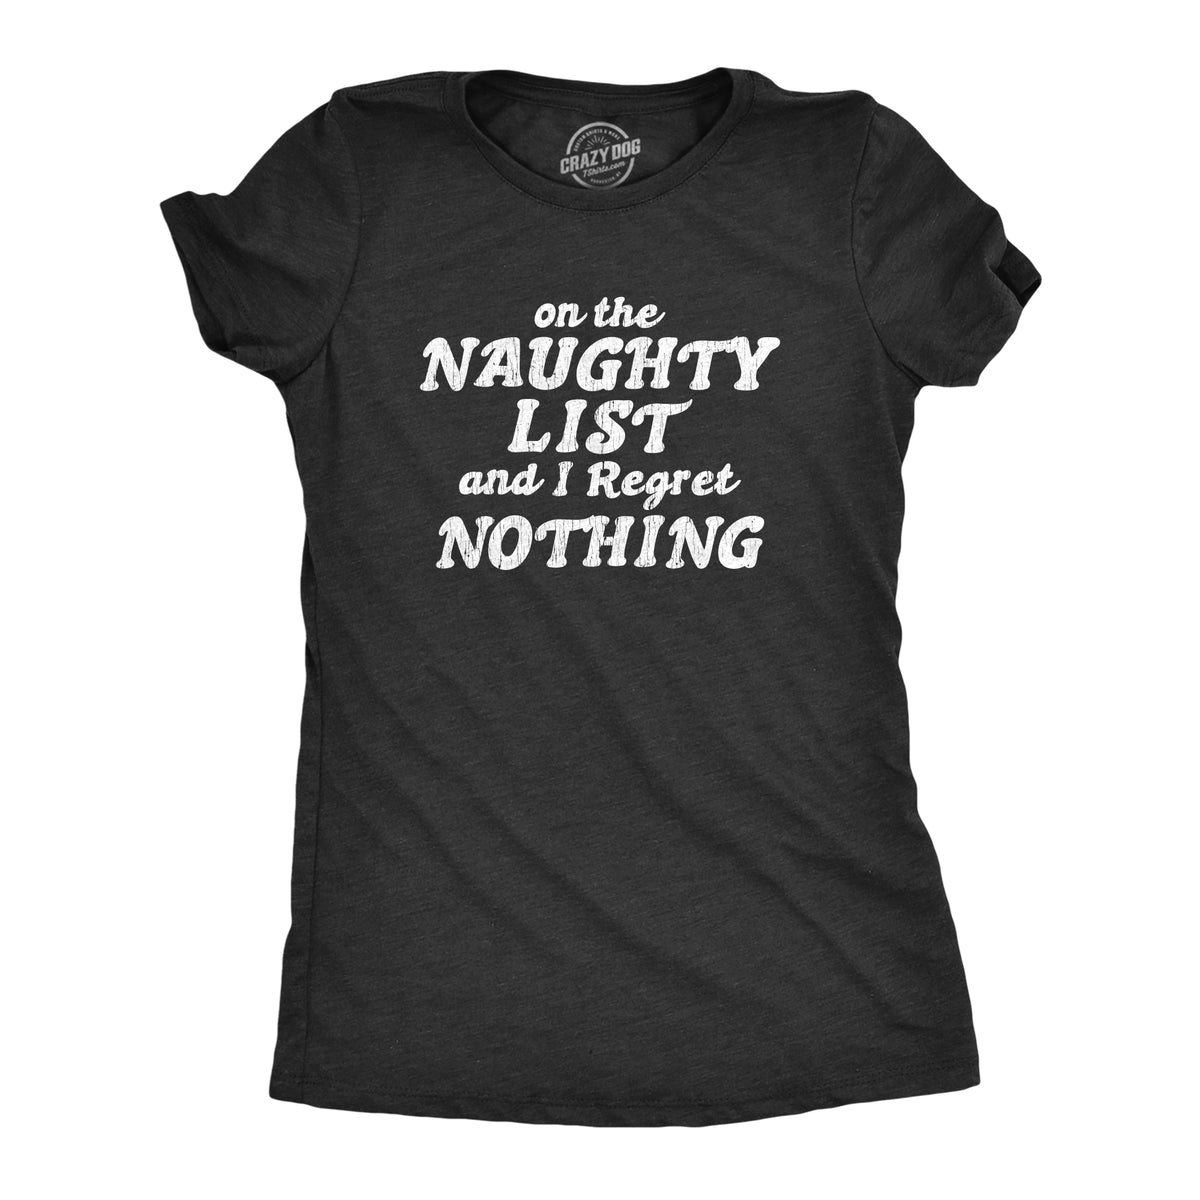 Funny Heather Red - Define Good On The Naughty List And I Regret Nothing Womens T Shirt Nerdy Christmas Tee